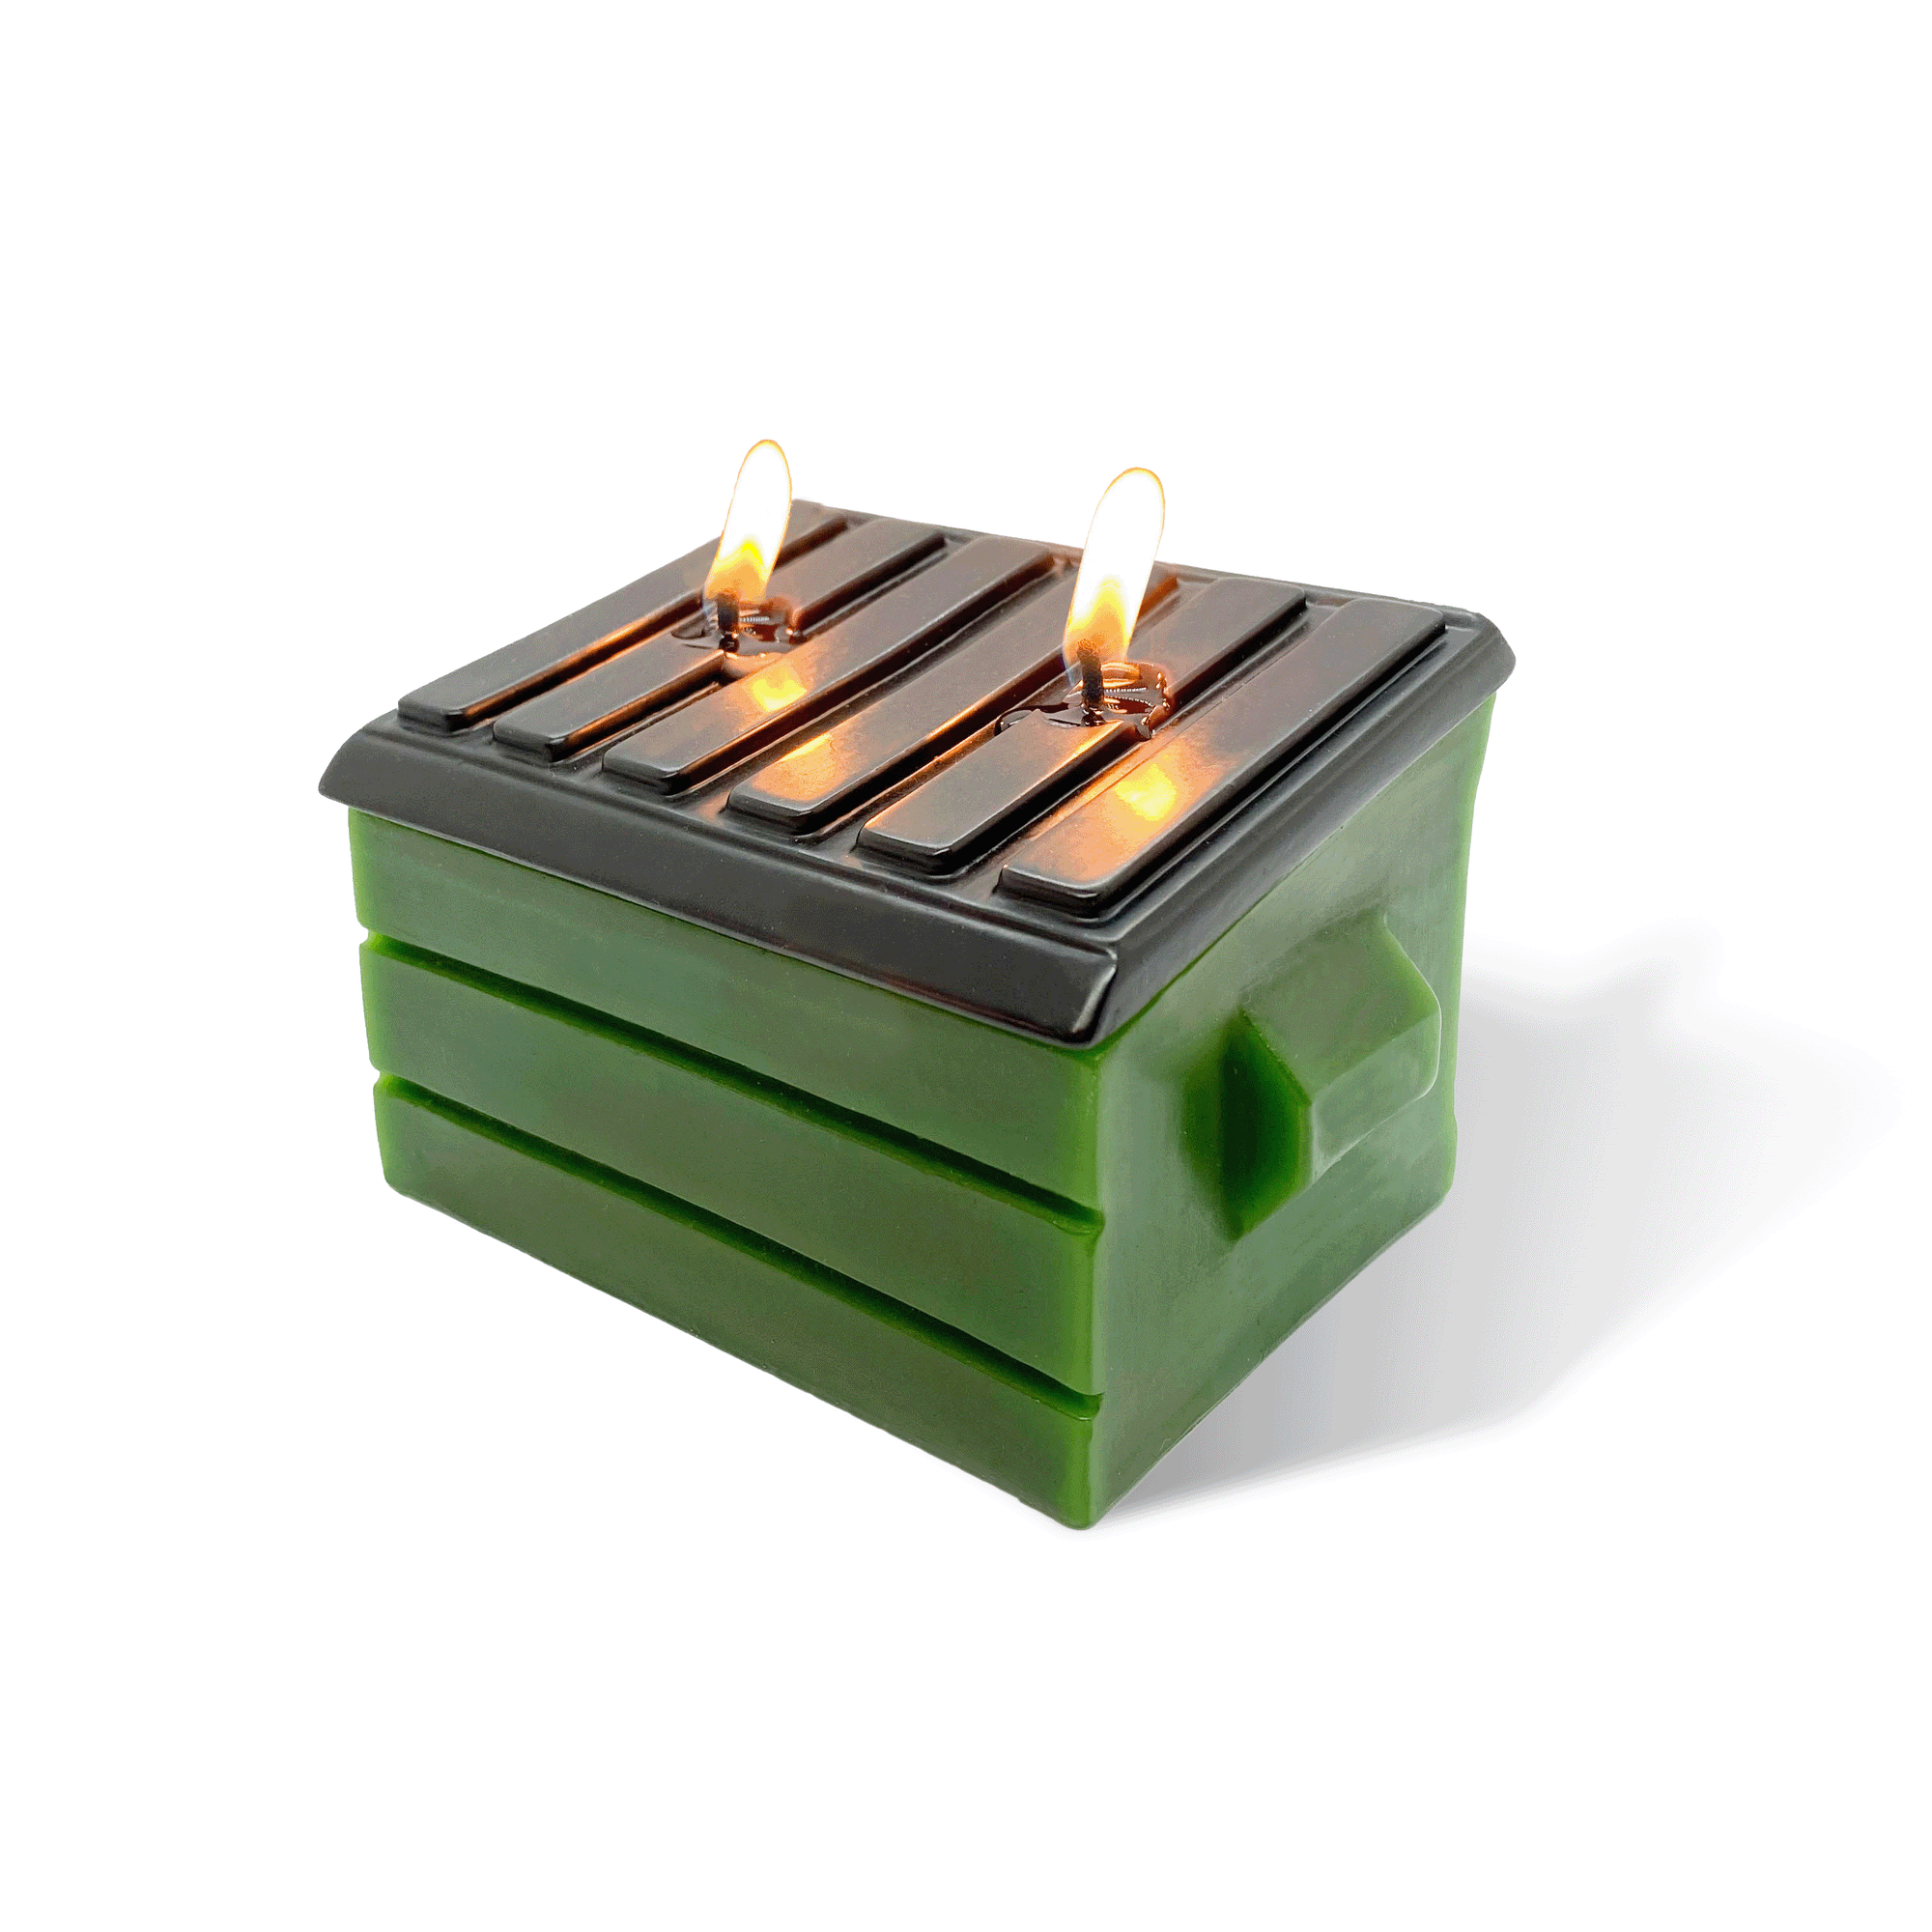 Dumpster Fire Novelty Candle